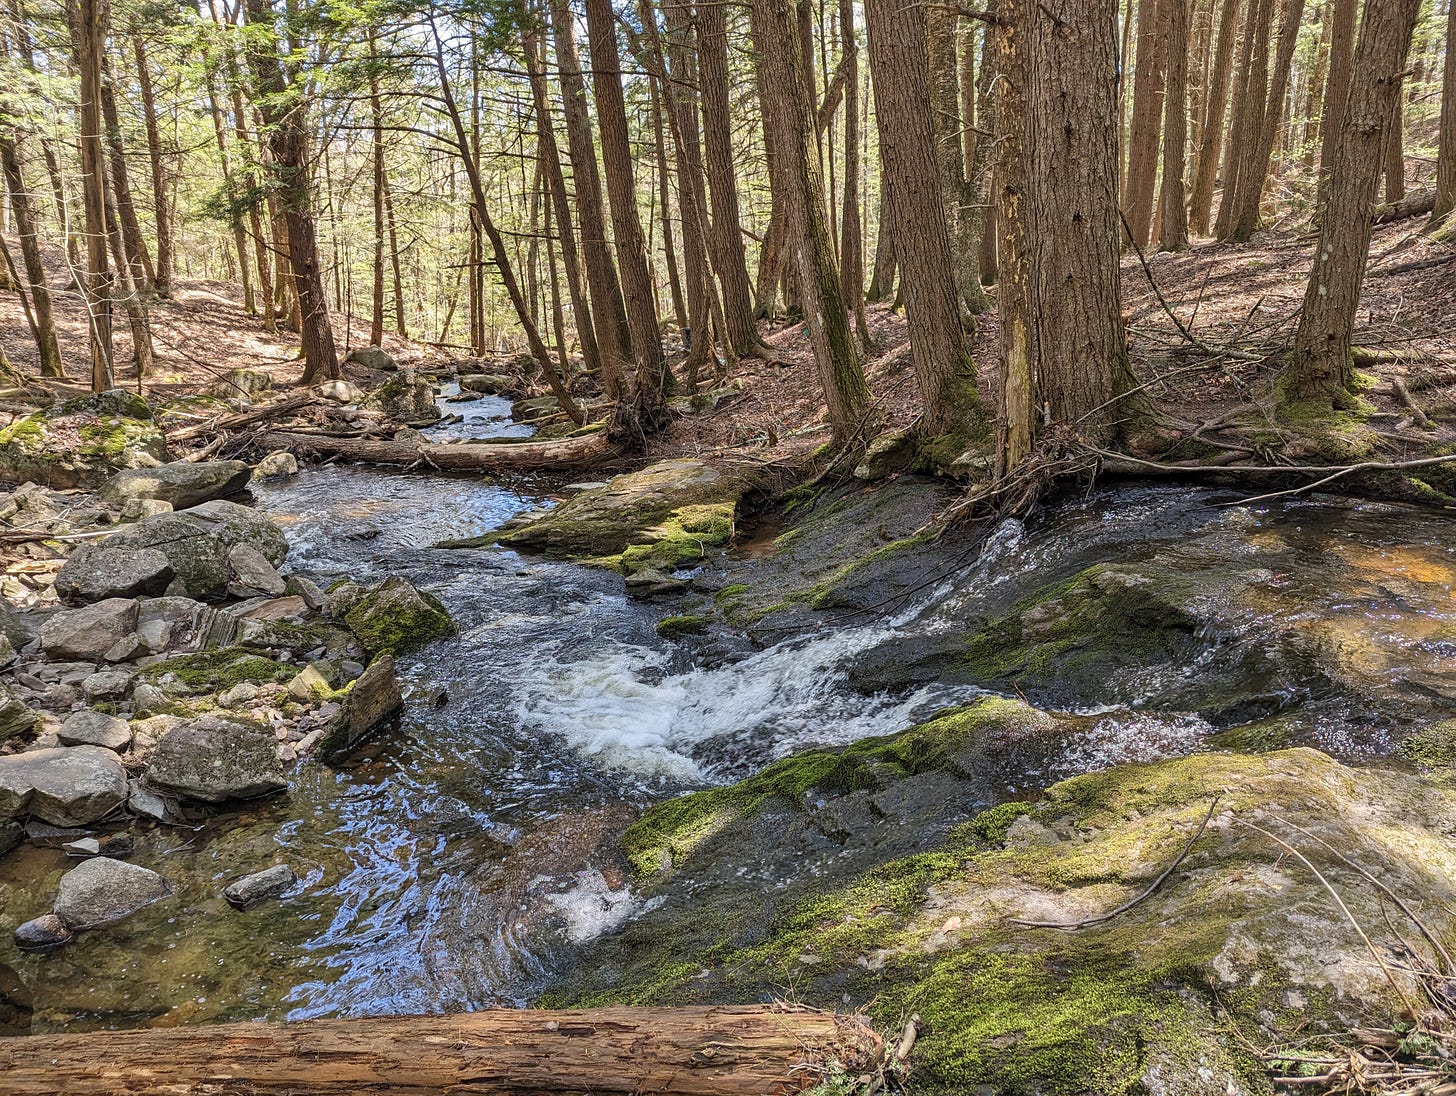 A photo of a stream following over rocks. It's a sunny day, and some of the rocks are covered in moss. Pines and cedars line the stream.